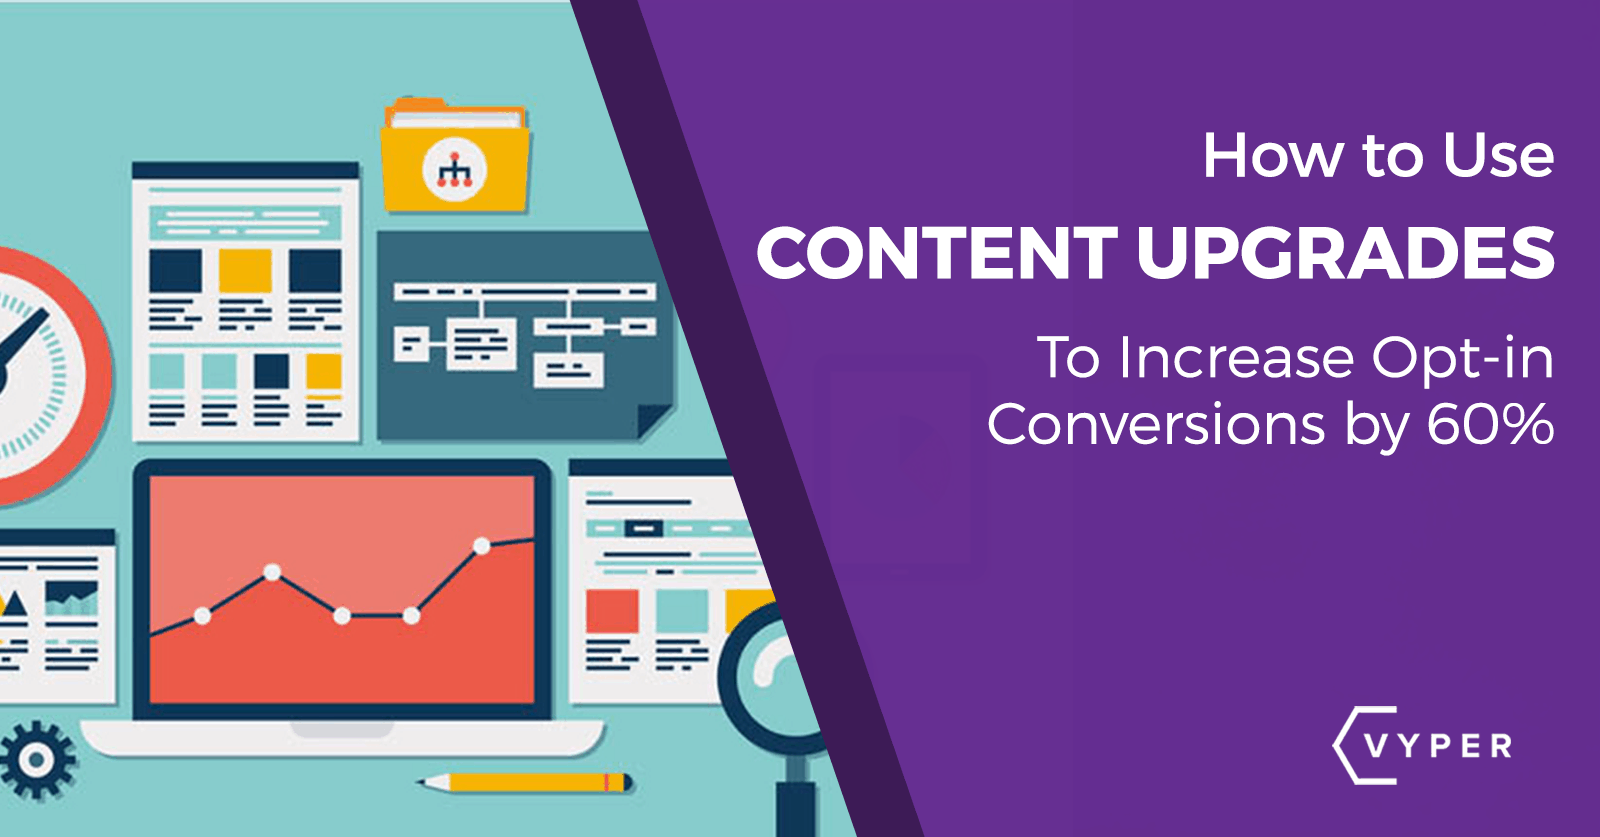 How to Use Content Upgrades to Increase Your Content Marketing Opt-ins by 60%